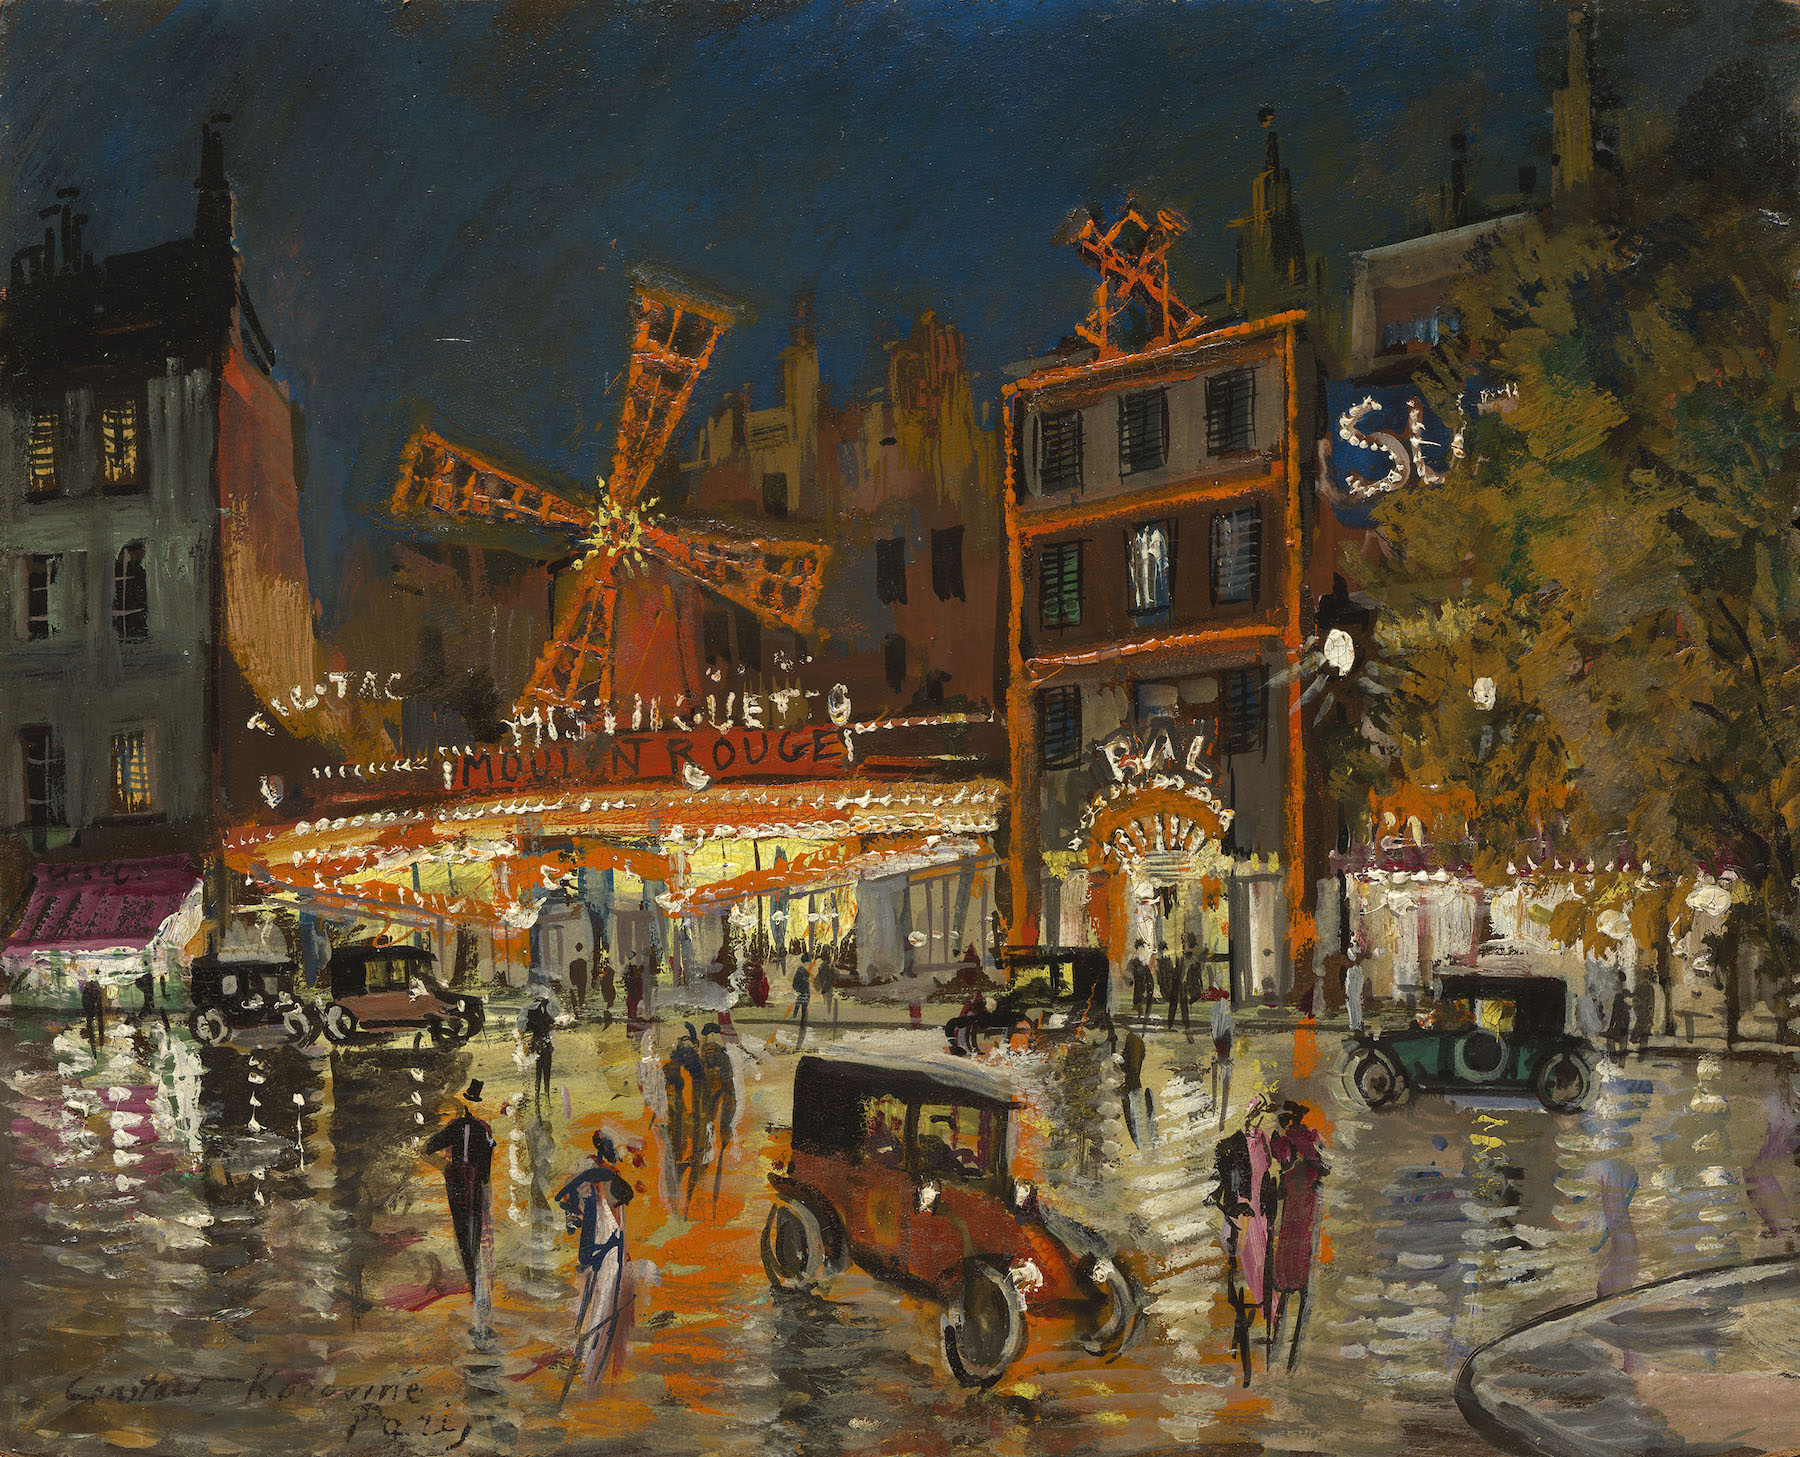 Moulin Rouge by Night